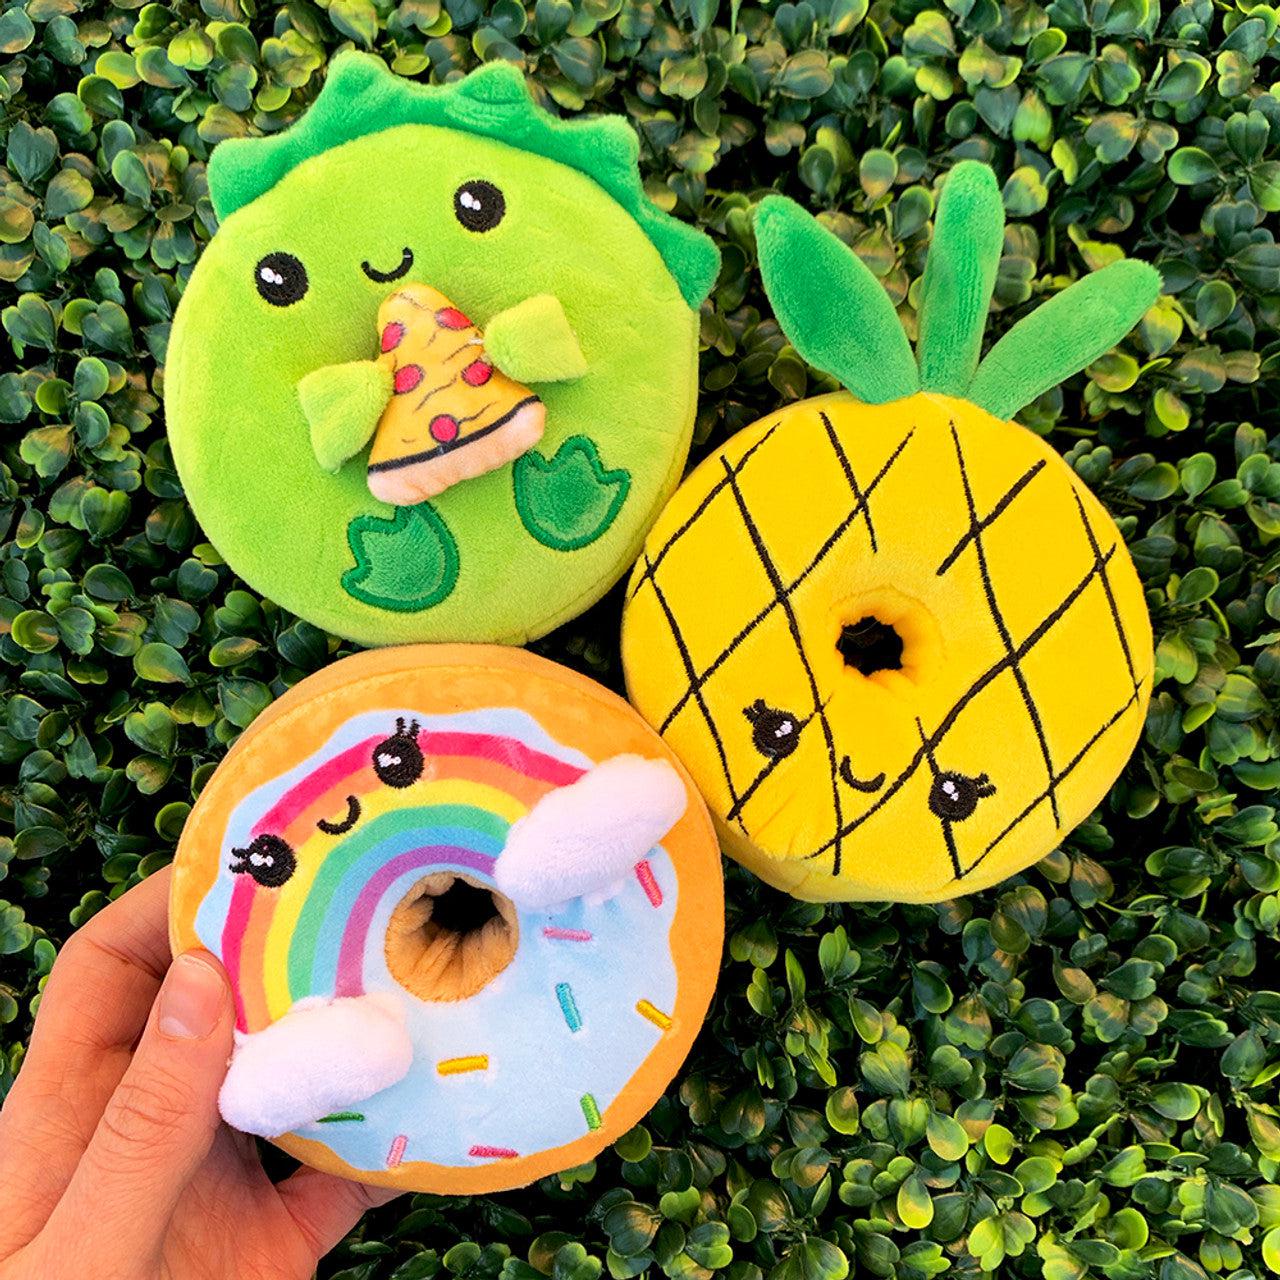 All 8 circular donut shaped plushies. Rainbow unicorn, green dinosaur with pizza, pastel cat with sunglasses and ice cream, shark, rainbow with clouds and sprinkles, pineapple, pastel narwal, pink cat with blue fish tail